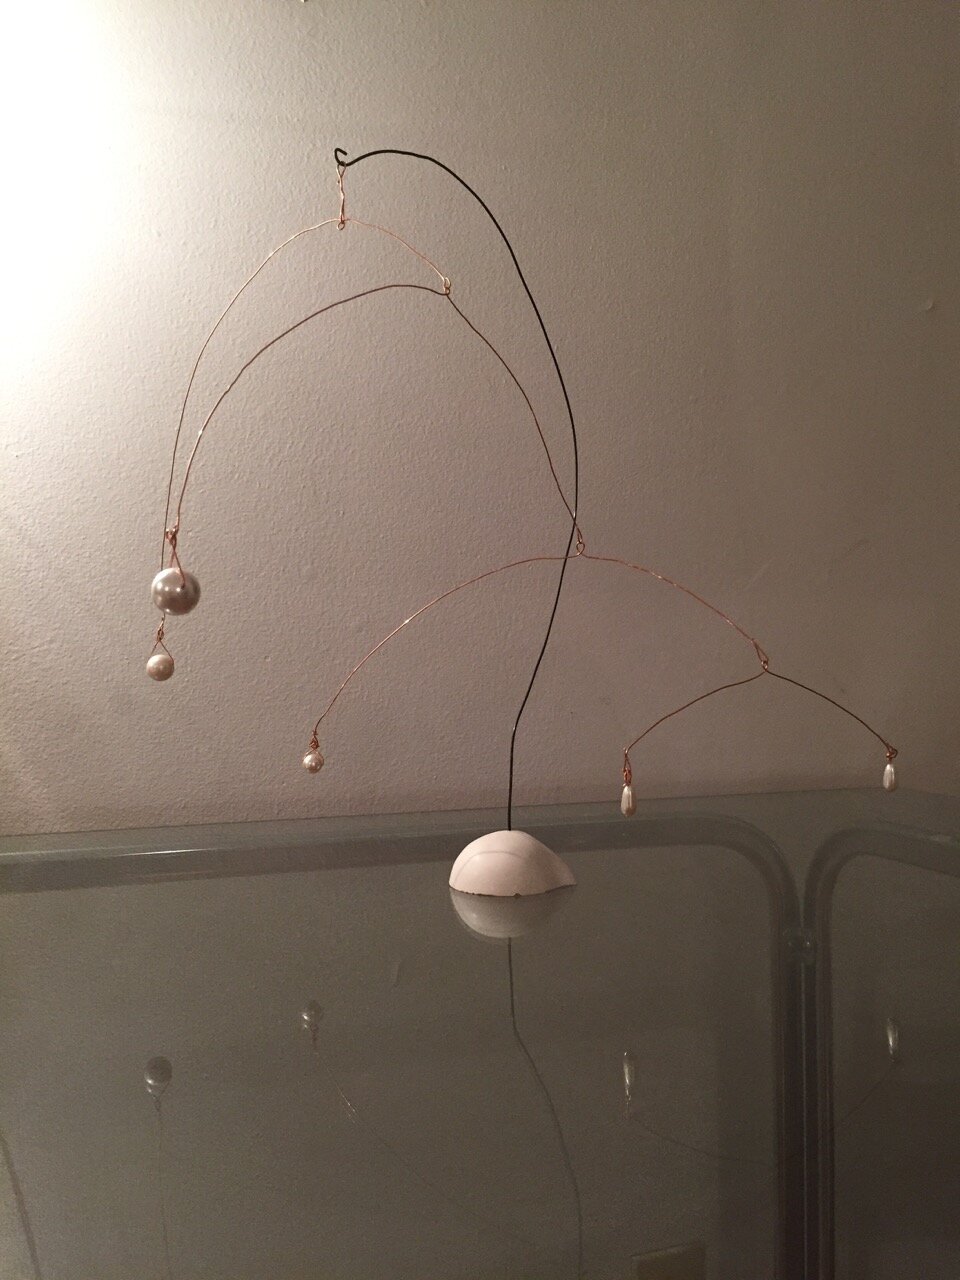  2017  pearl beads, copper wire, steel wire, plaster 